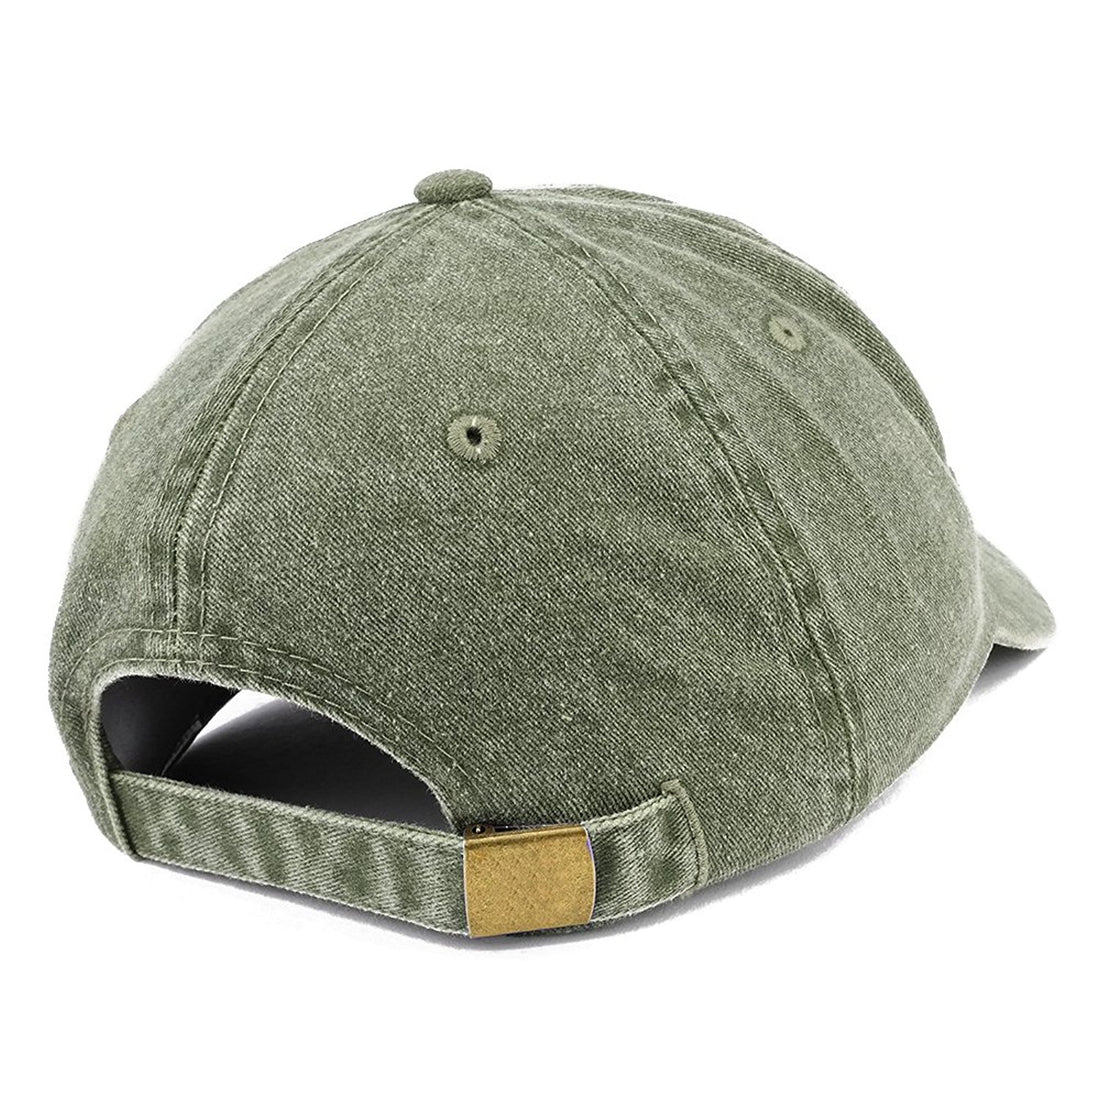 Trendy Apparel Shop Established 1974 Embroidered 45th Birthday Gift Pigment Dyed Washed Cotton Cap